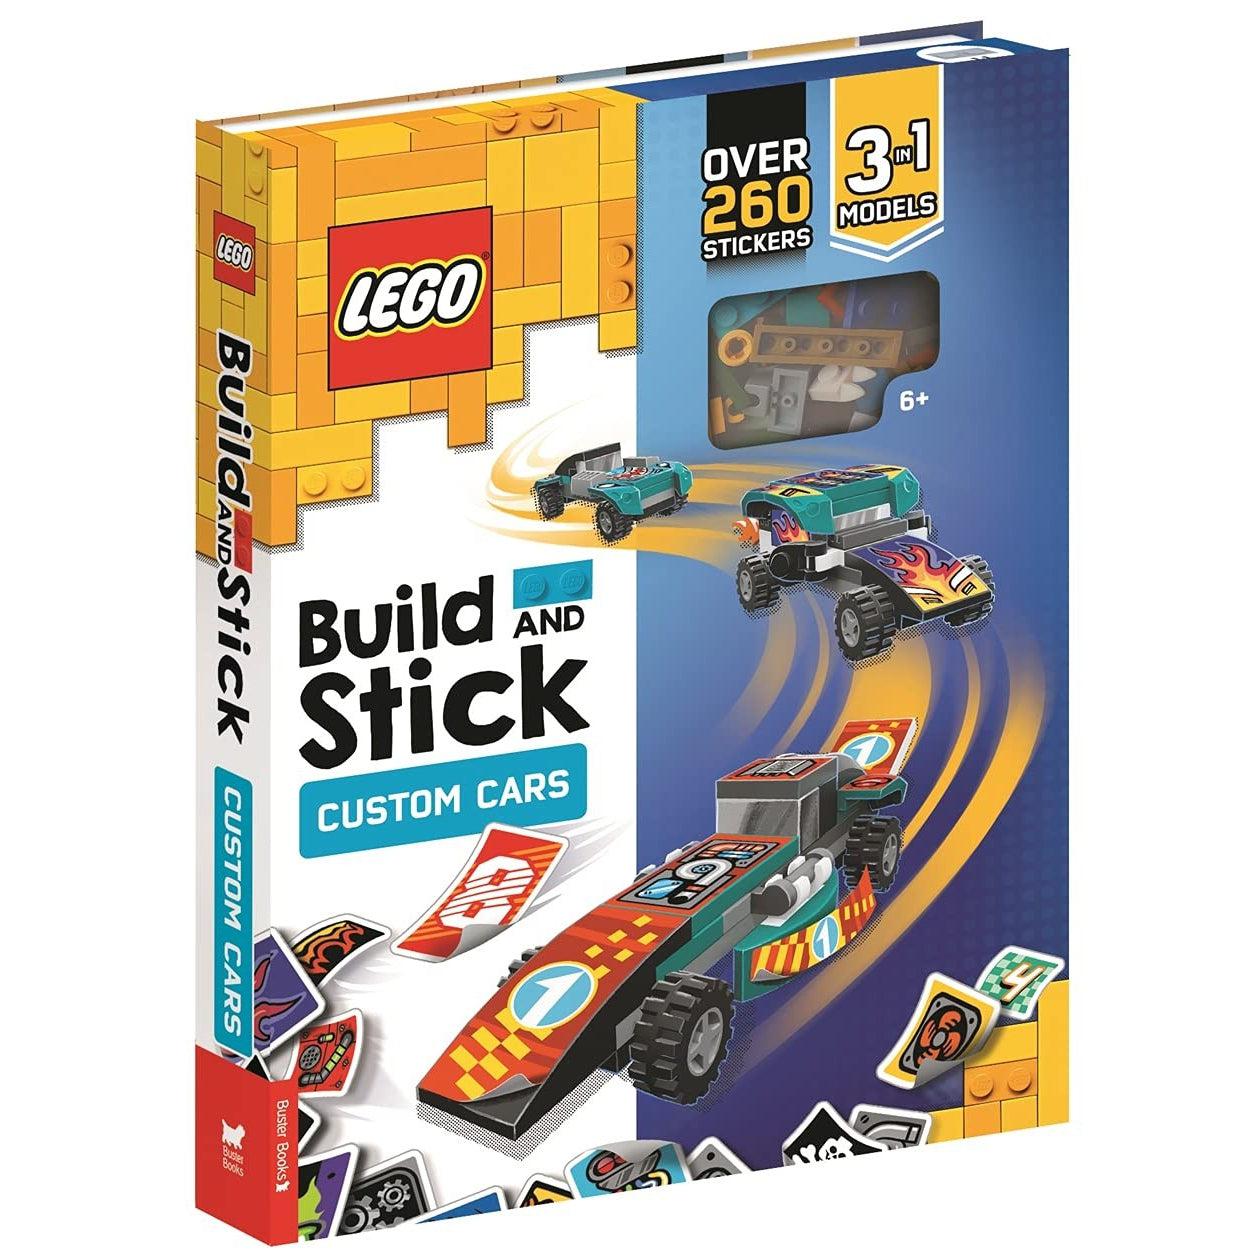 Lego® Build And Stick: Custom Cars (Includes Lego® Bricks, Book And Over 260 Stickers)